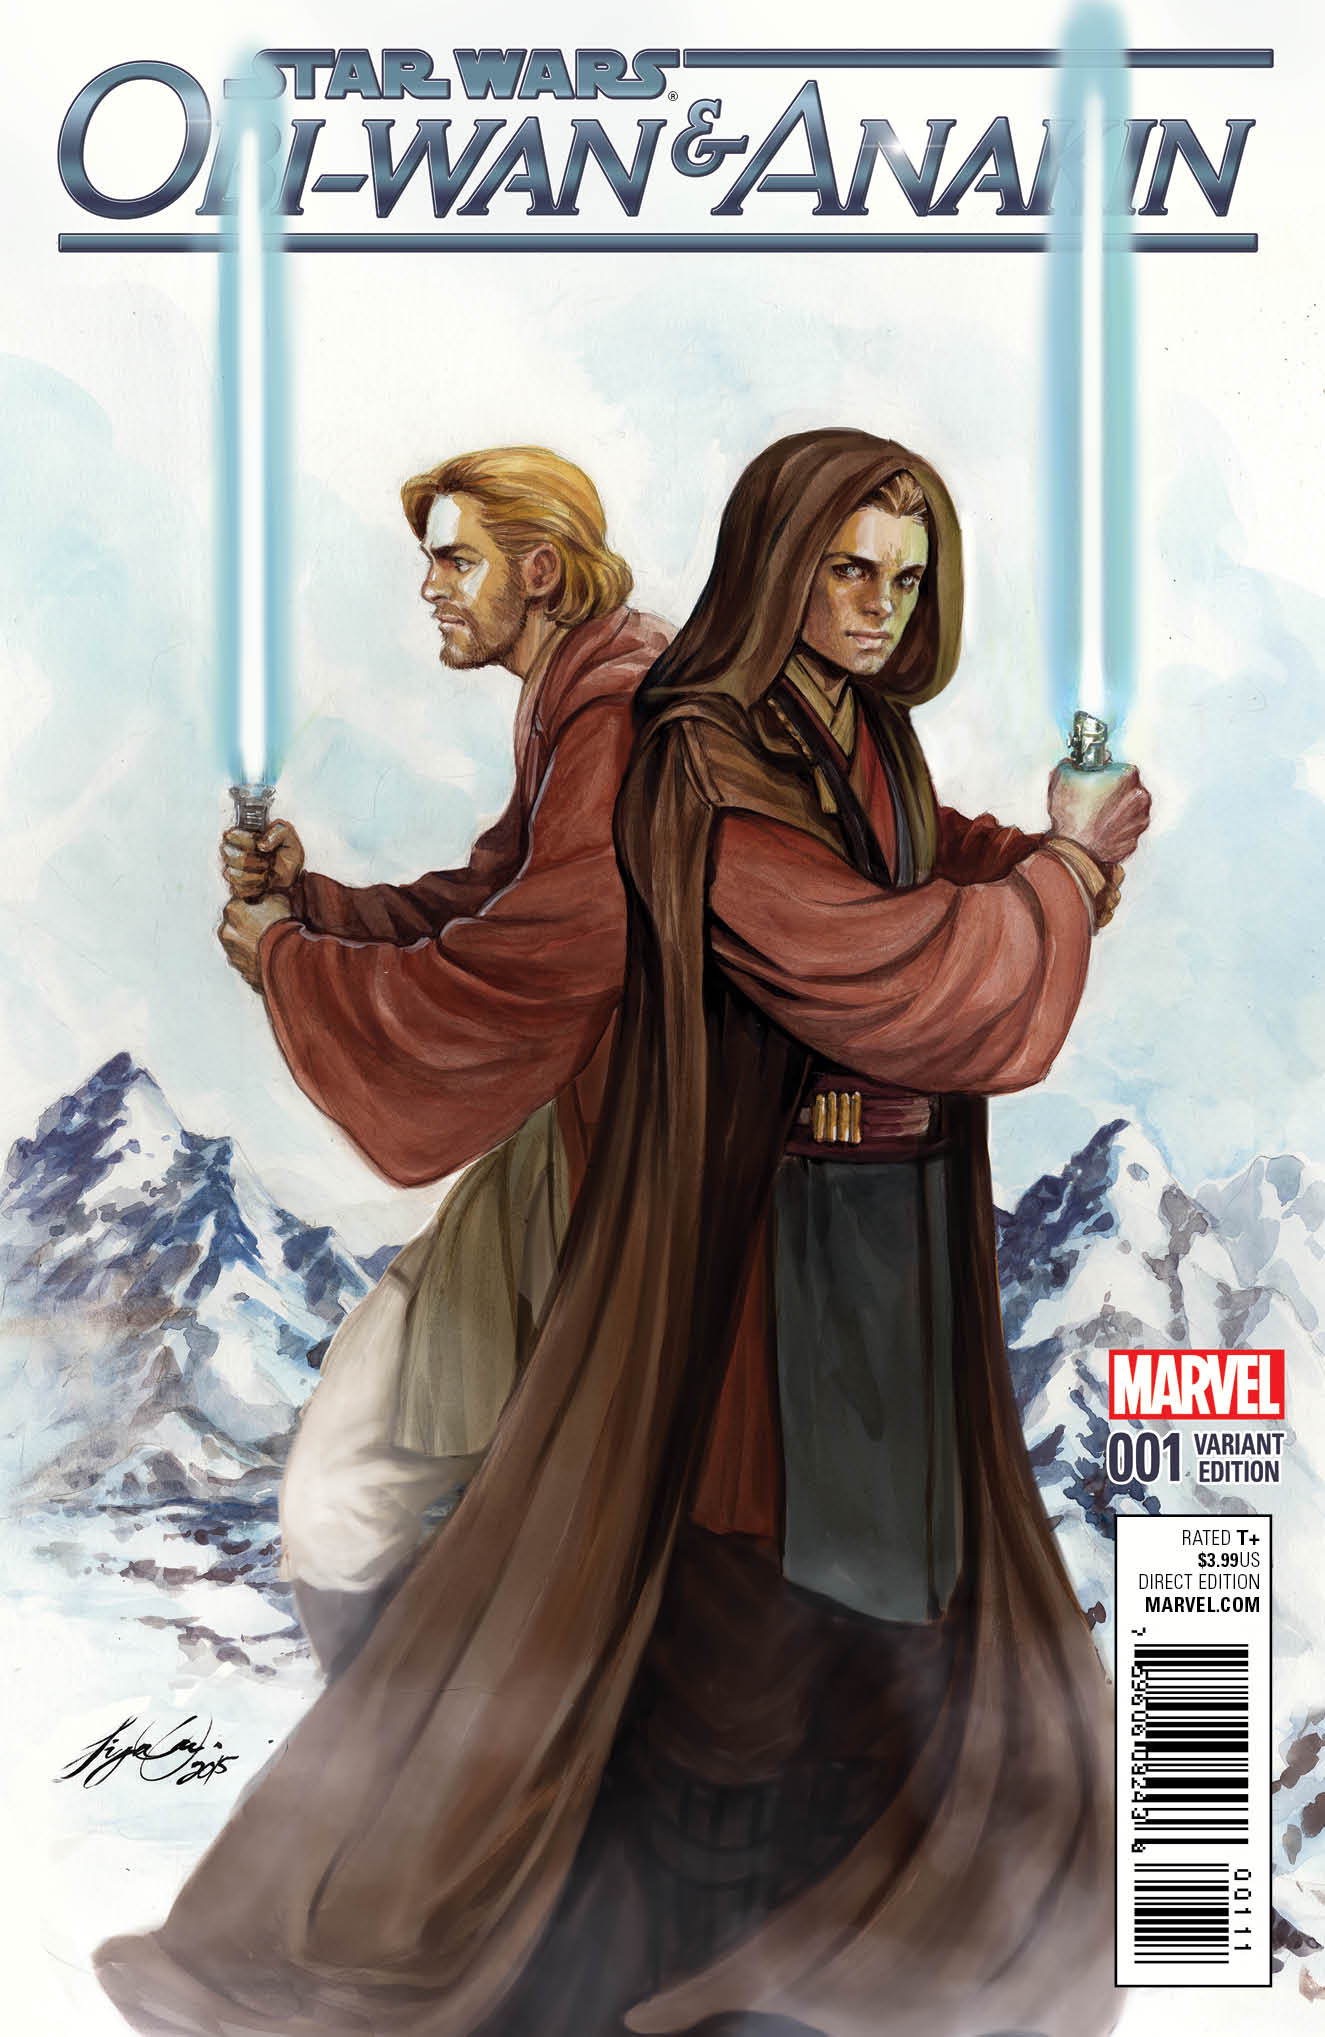 Preview: Master Obi-Wan and Padawan Anakin have adventures in new